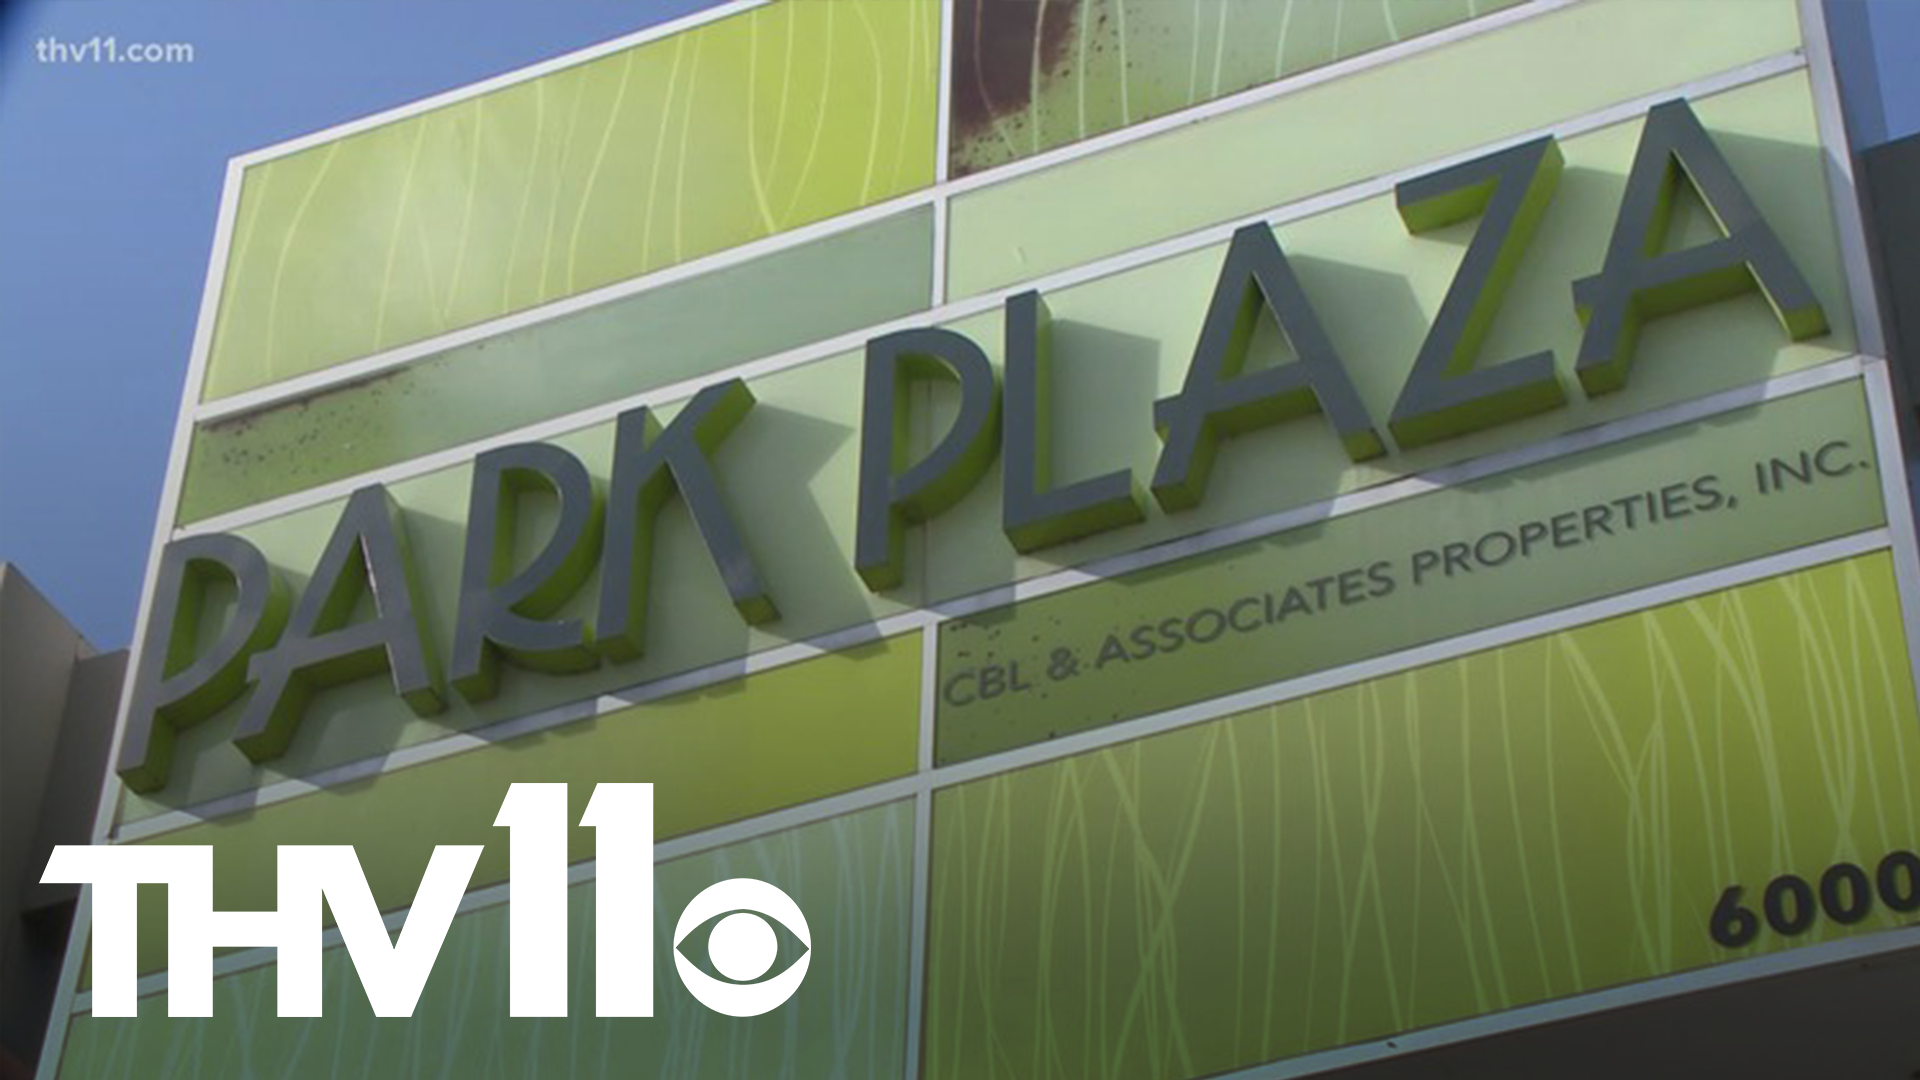 A judge awarded an $86.2 million judgment with interest to Deutsche Bank Trust Co. Americas against Park Plaza Mall CMBS LLC, according to Arkansas Business.